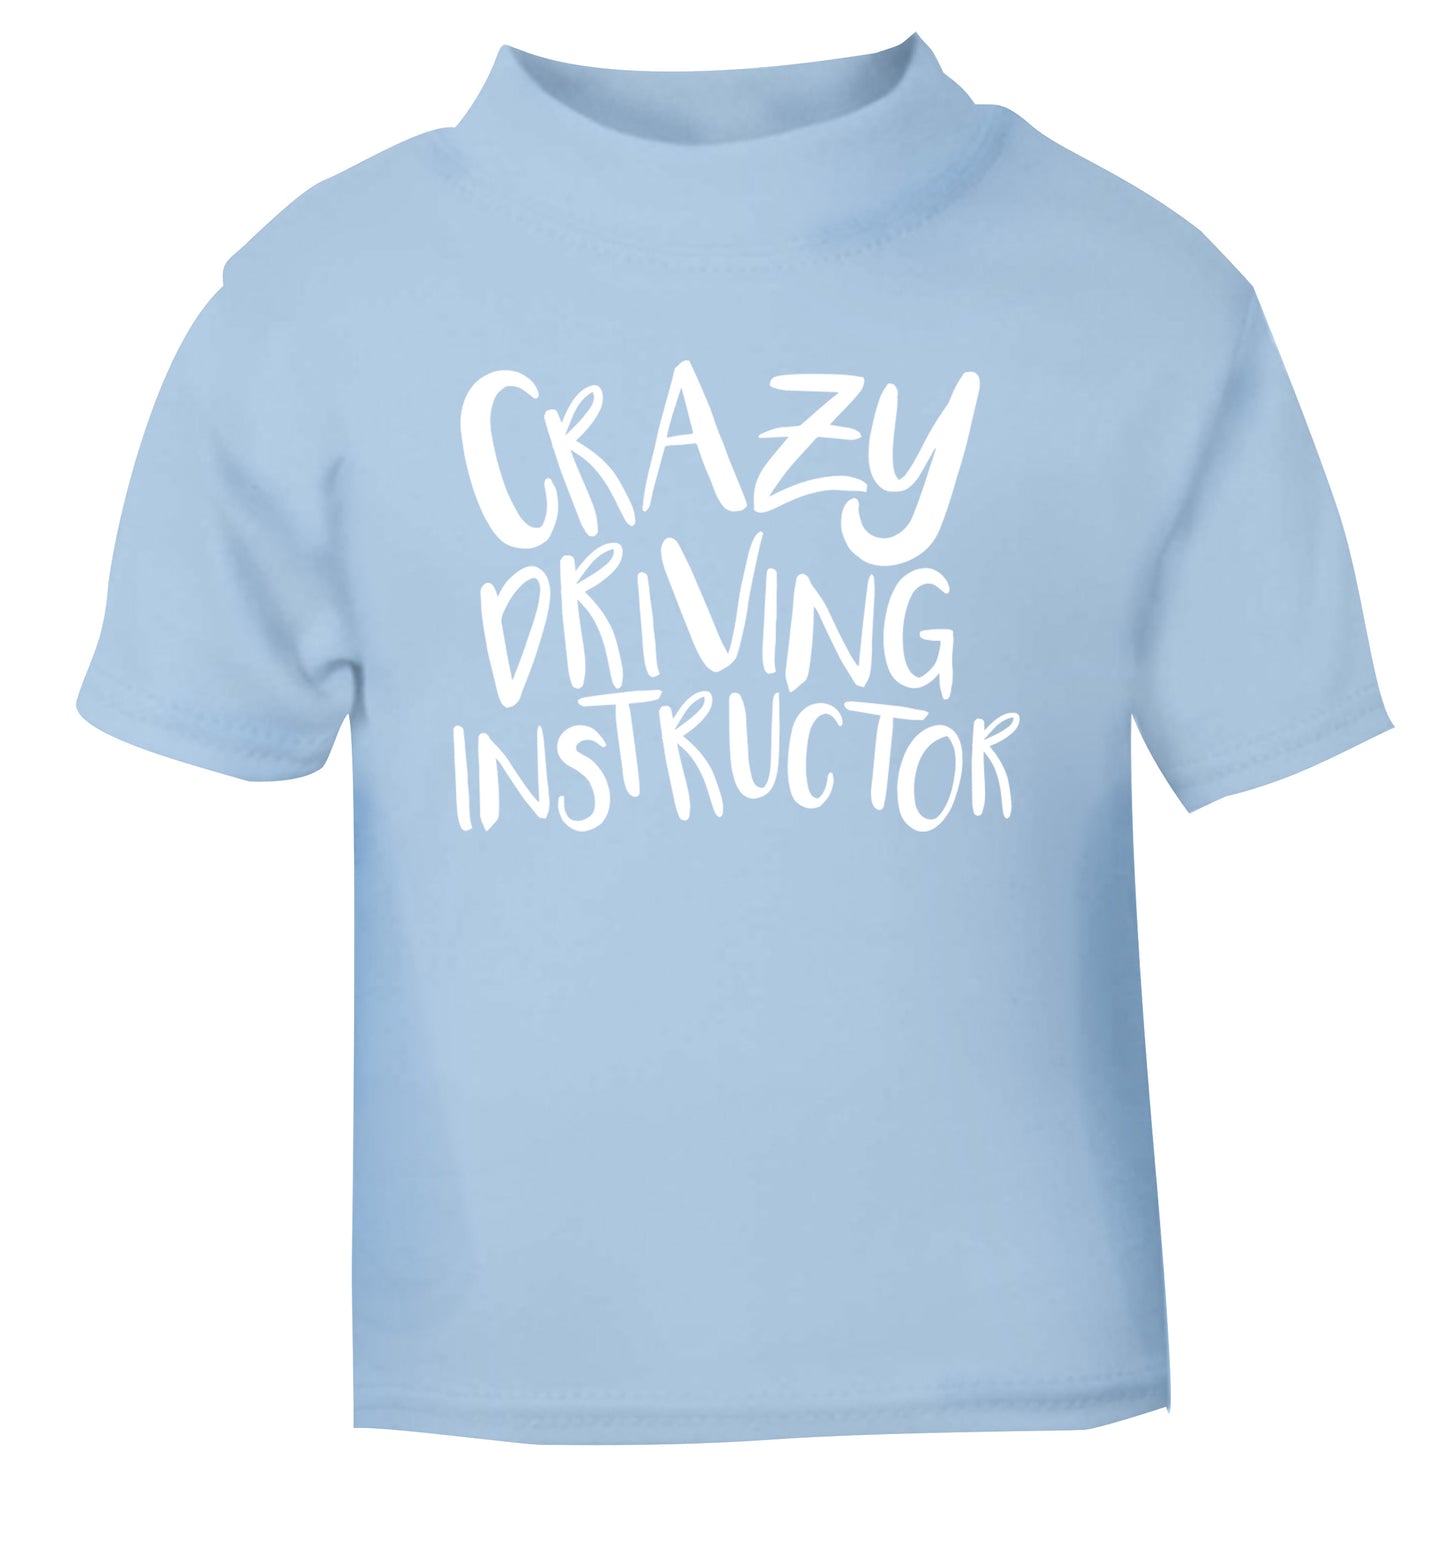 Crazy driving instructor light blue Baby Toddler Tshirt 2 Years